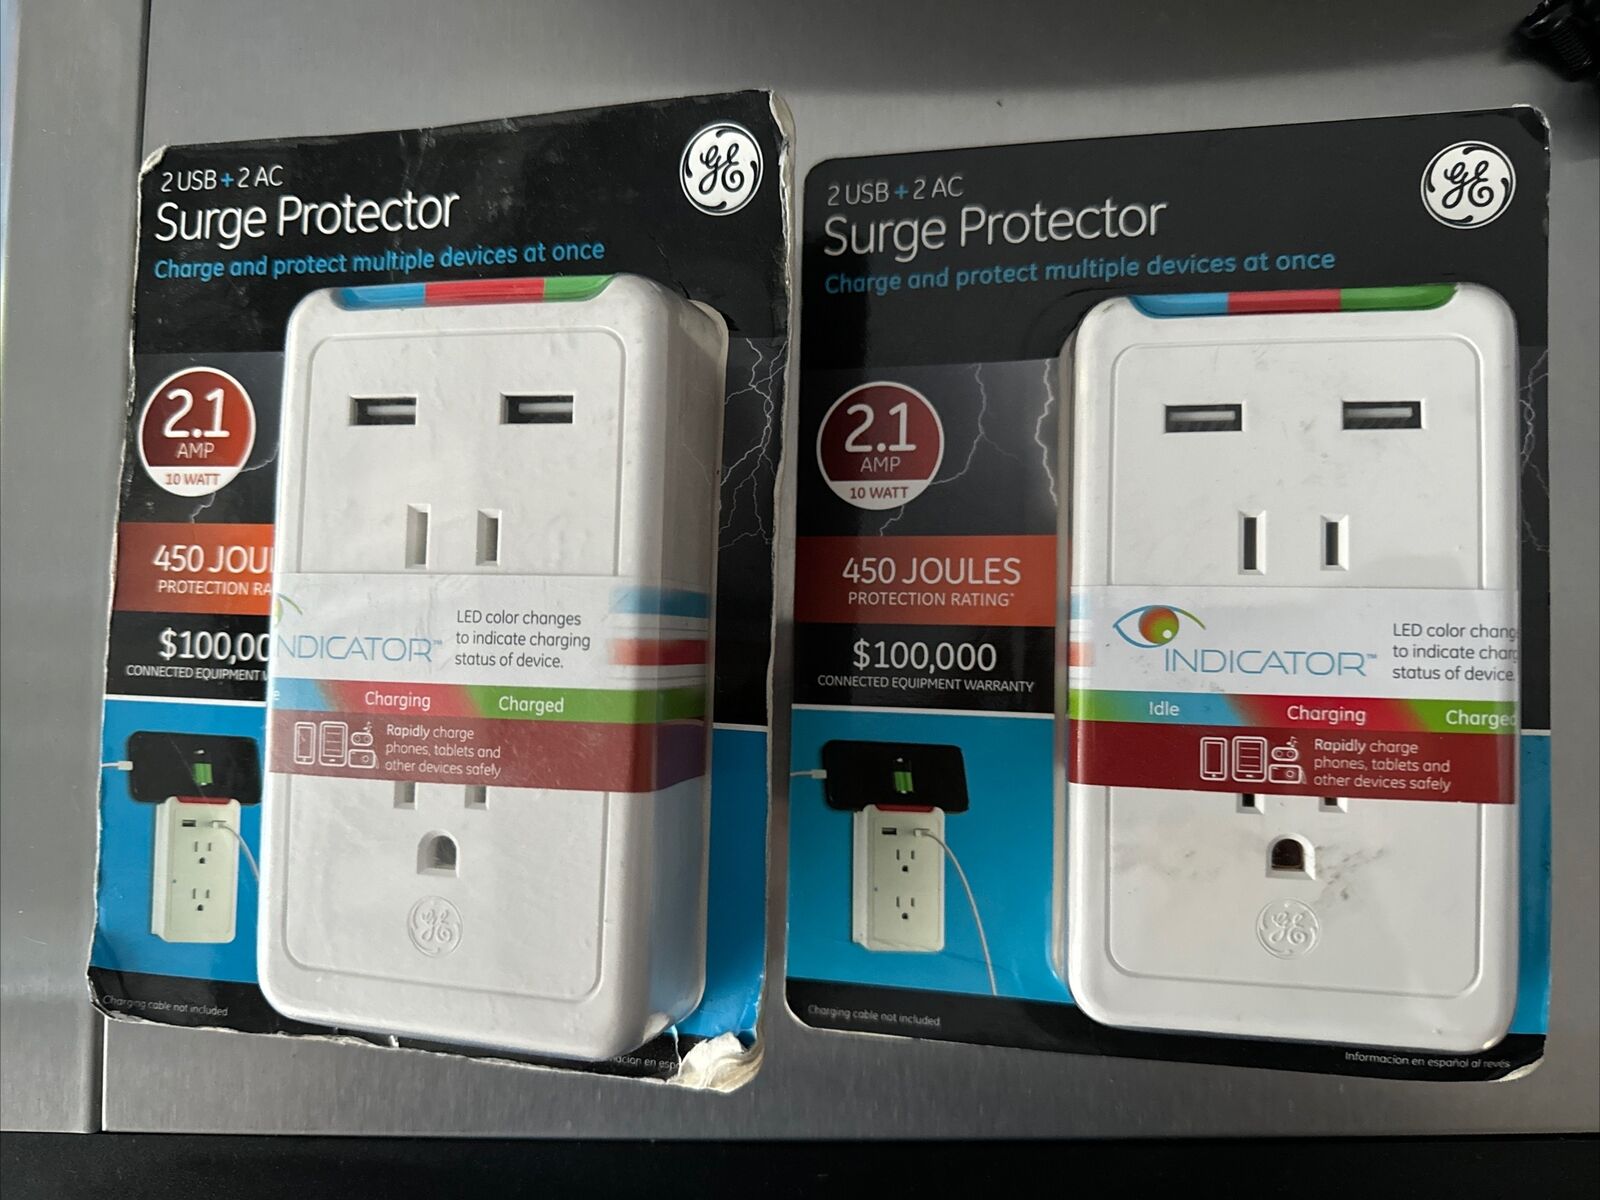 2x GE Surge Protector 2 USB + 2 AC - Directly Mounted To Outlet